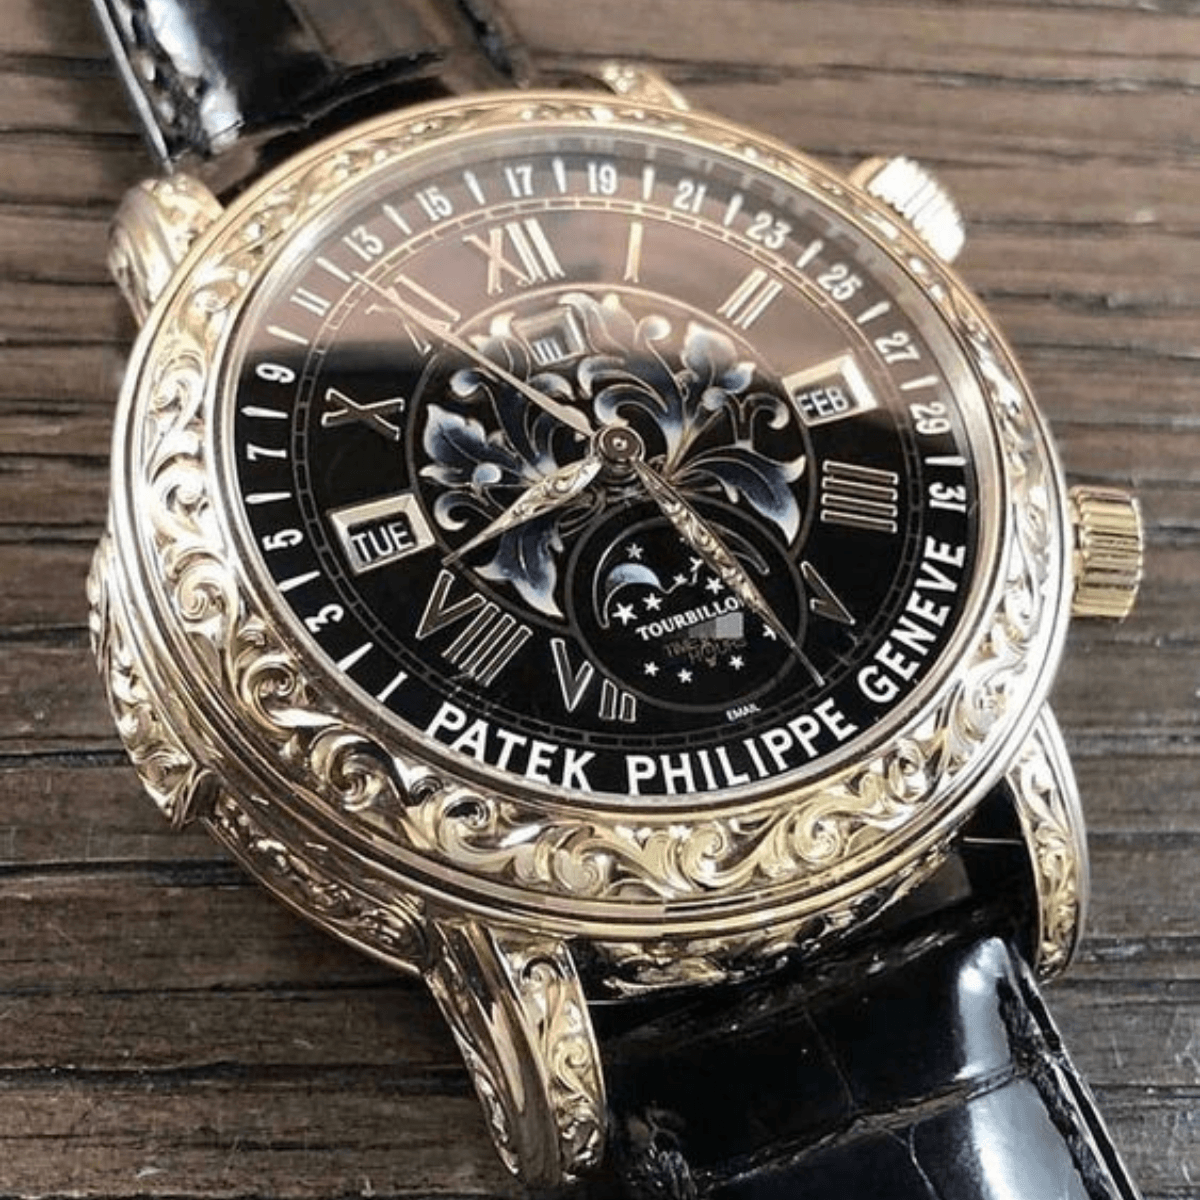 Hublot vs Patek Philippe? Choosing the Right Luxury Watch for You (2023 Review)